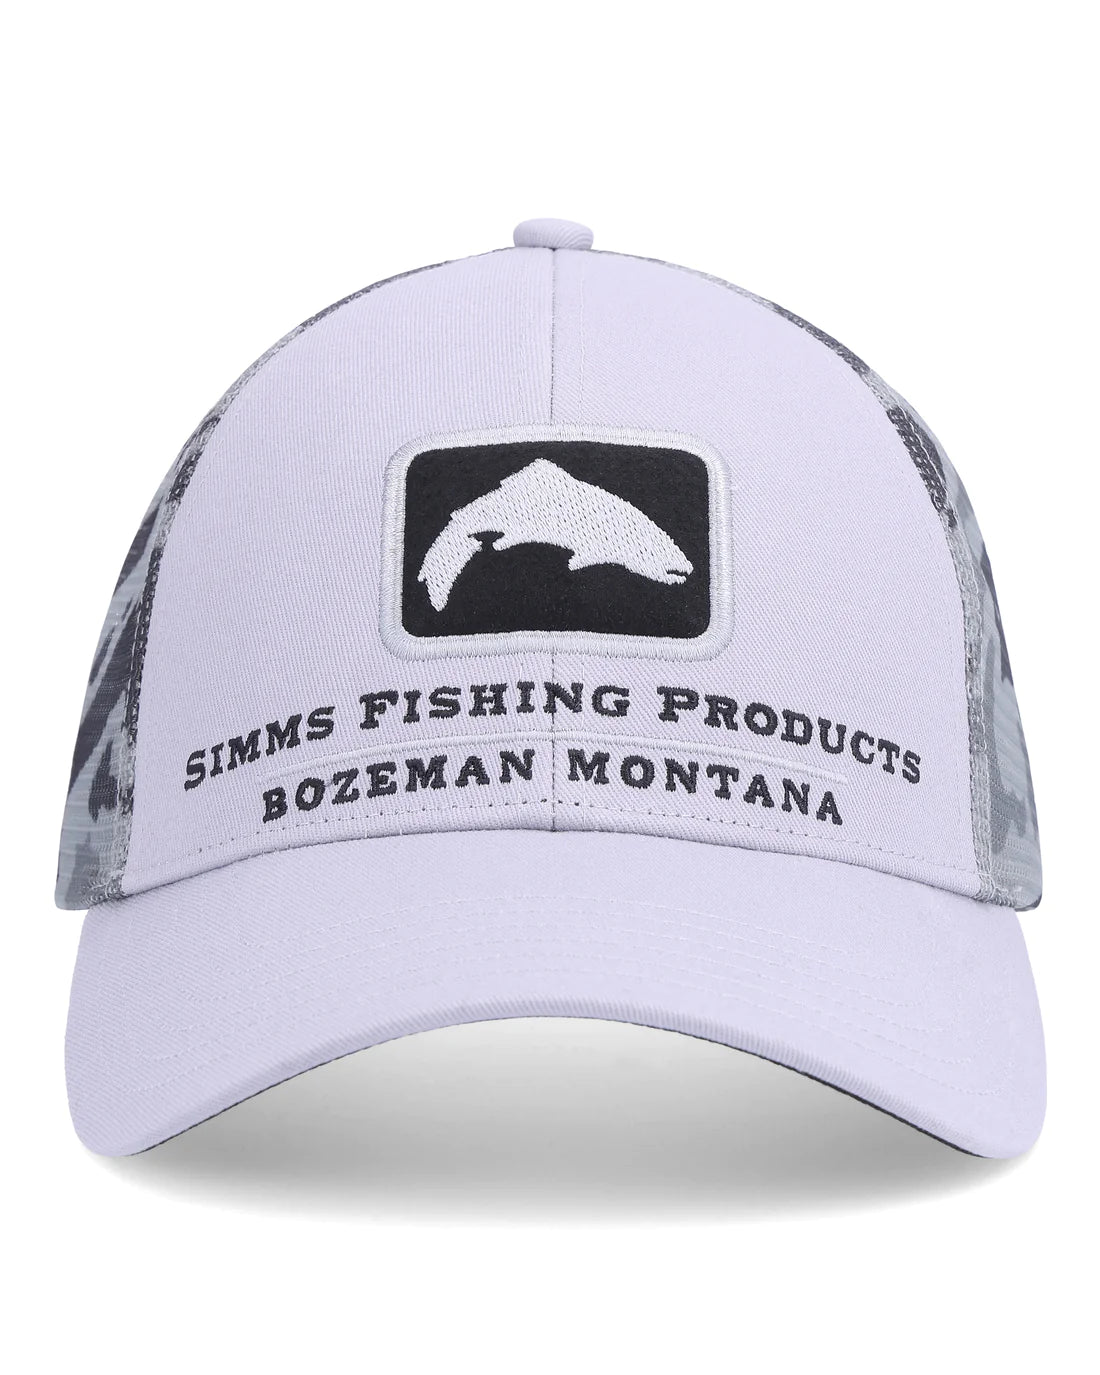 Simms Trout Icon Trucker - OSFM / GHOST CAMO STEEL - Mansfield Hunting & Fishing - Products to prepare for Corona Virus